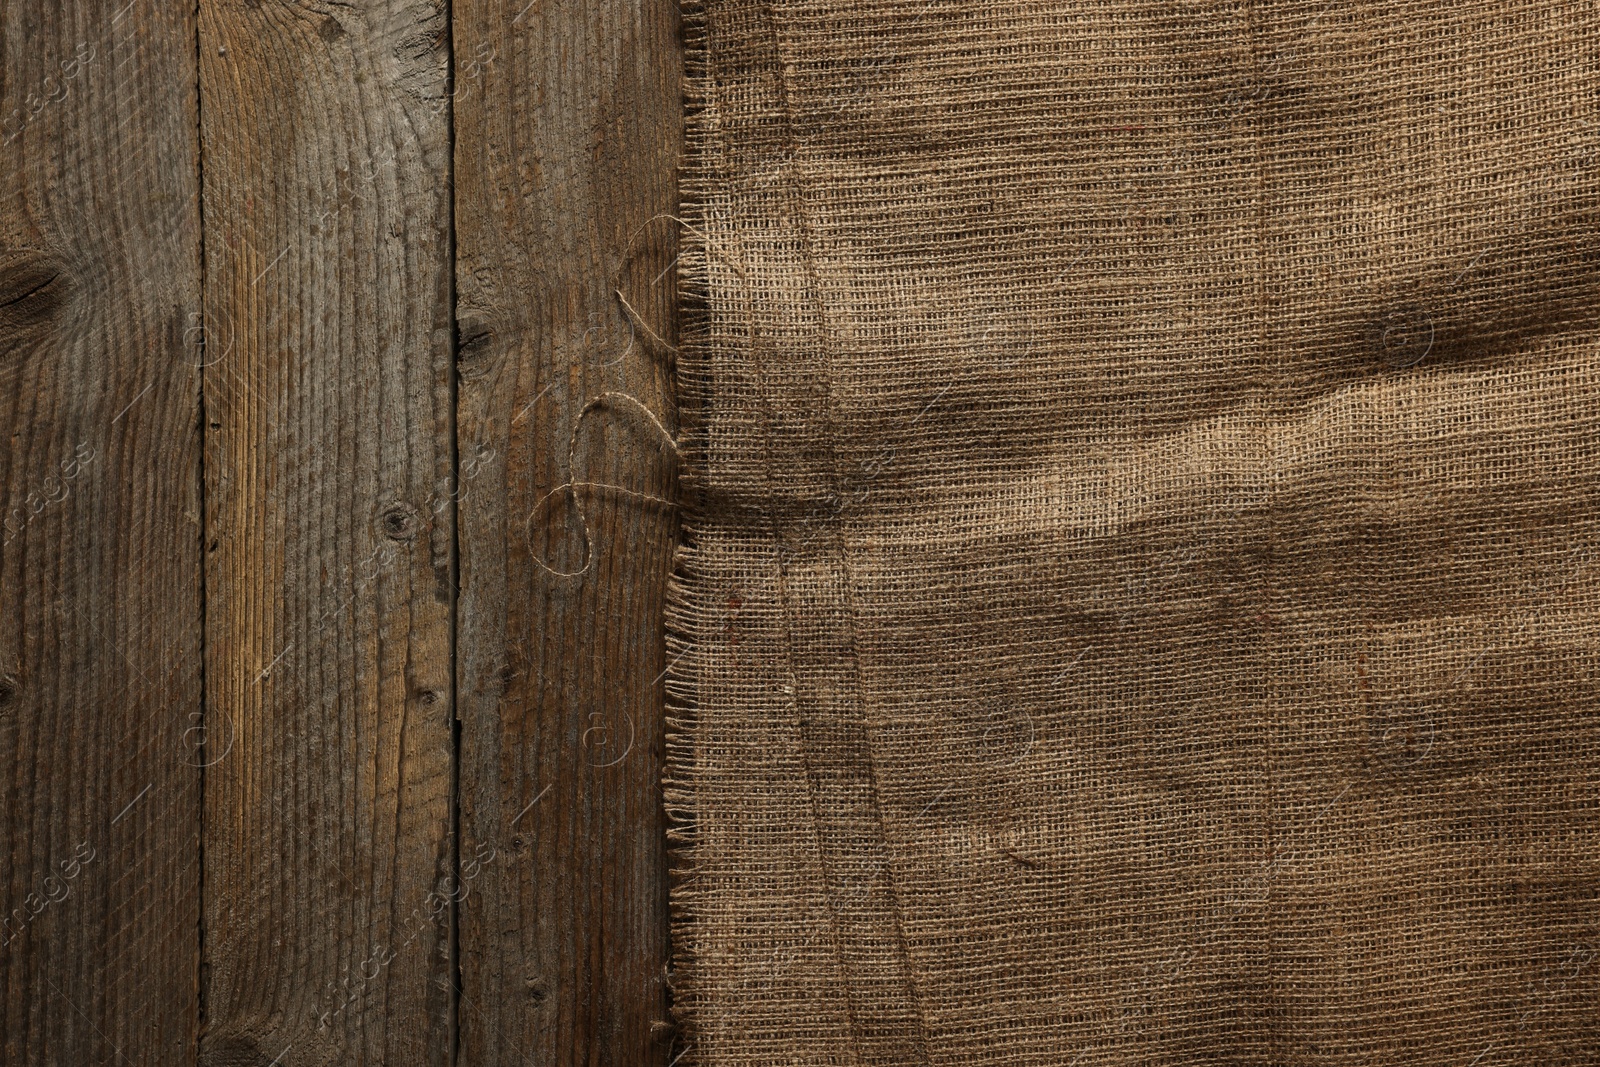 Photo of Burlap fabric on wooden table, top view. Space for text